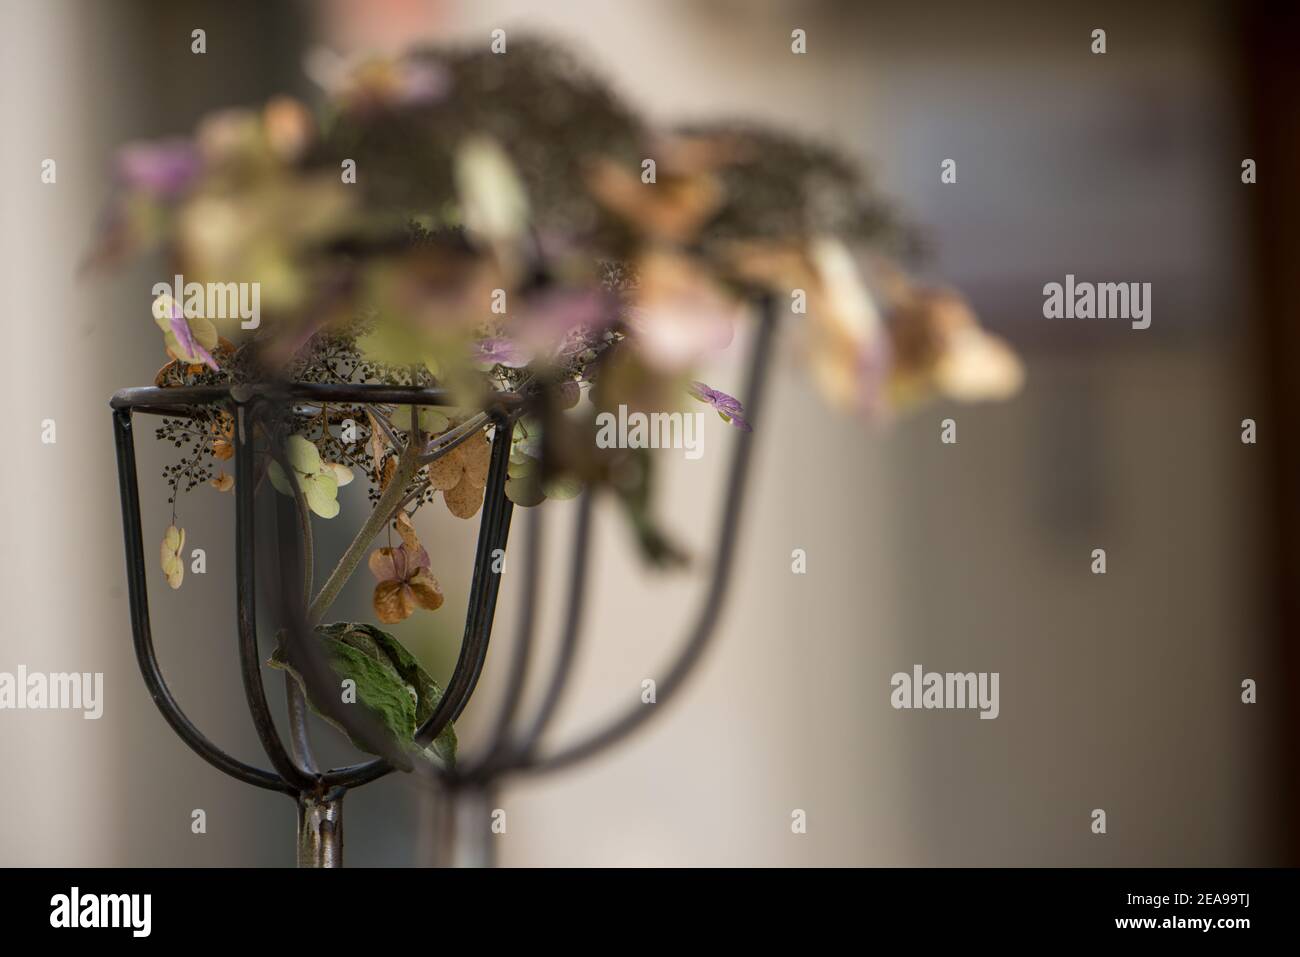 Flowers, blurring, blossoms, faded Stock Photo